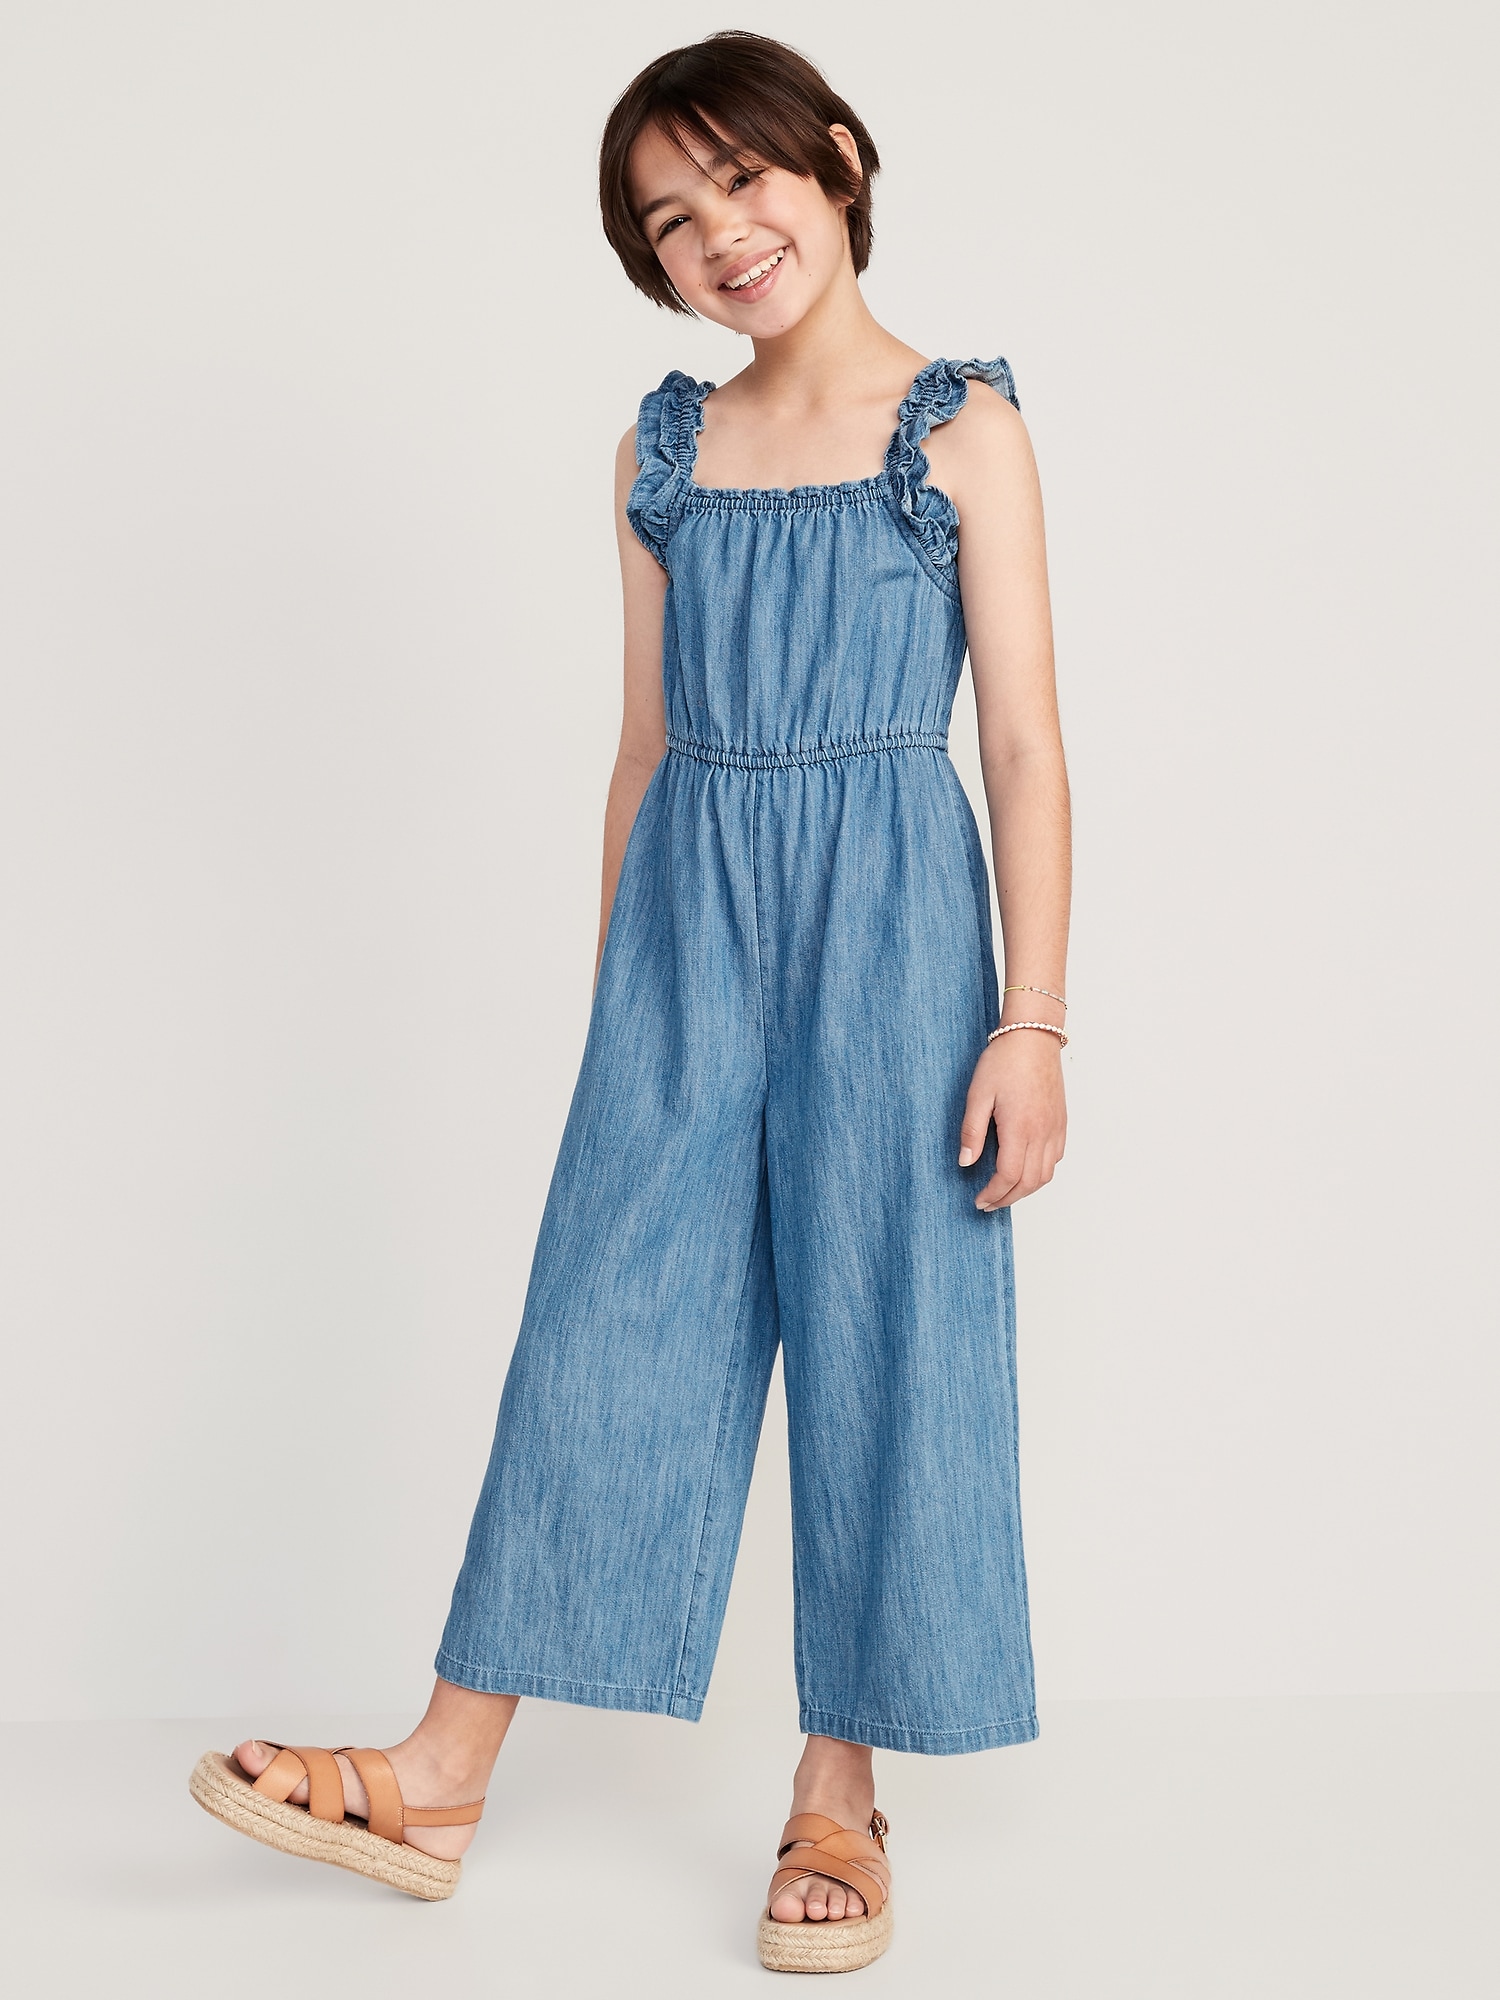 Old Navy Sleeveless Chambray Ruffle-Trim Jumpsuit for Girls blue. 1